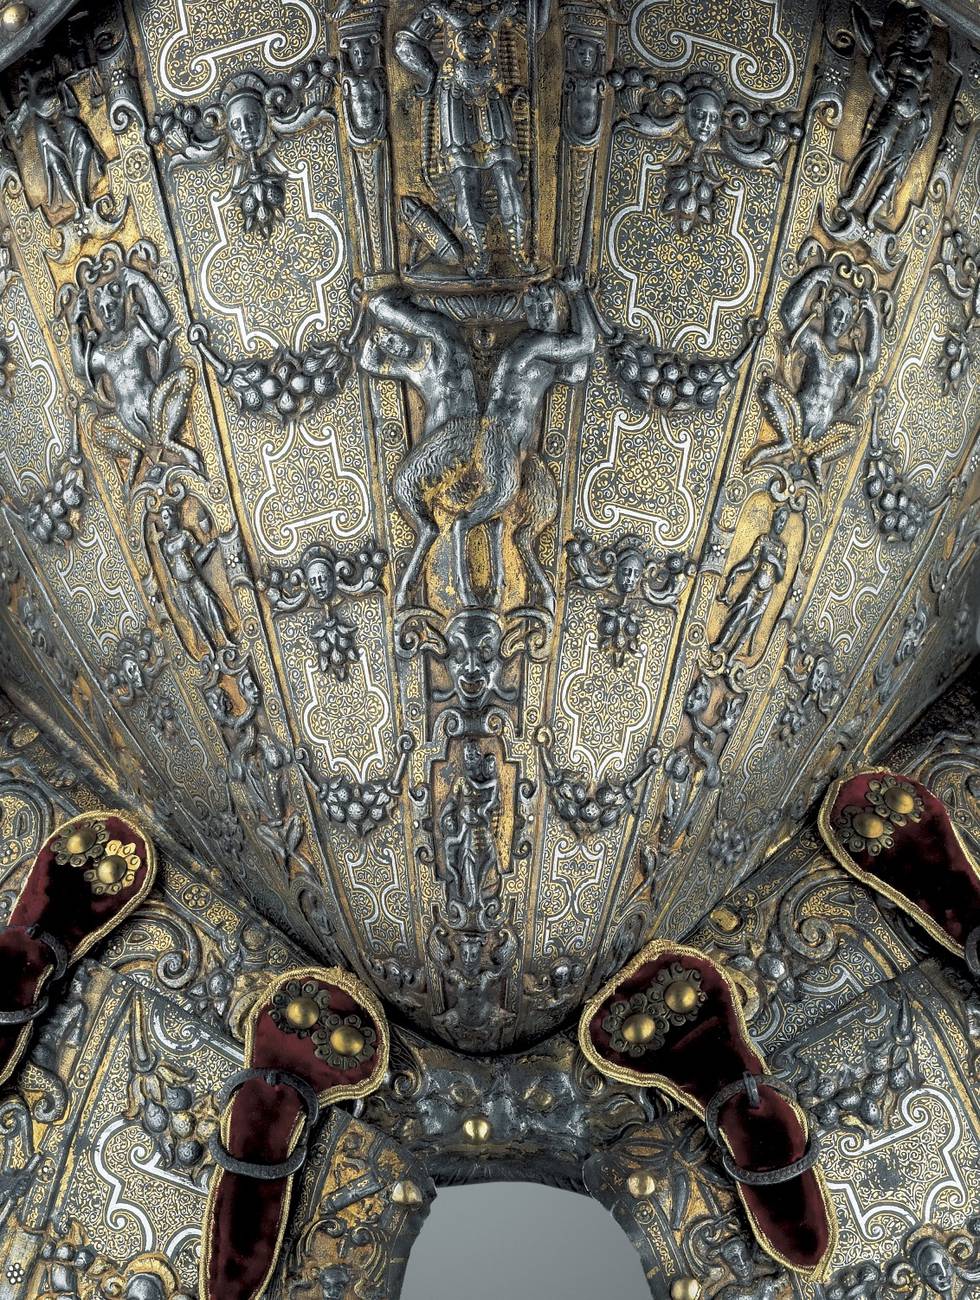 Close up detail of the front of a richly detailed armour